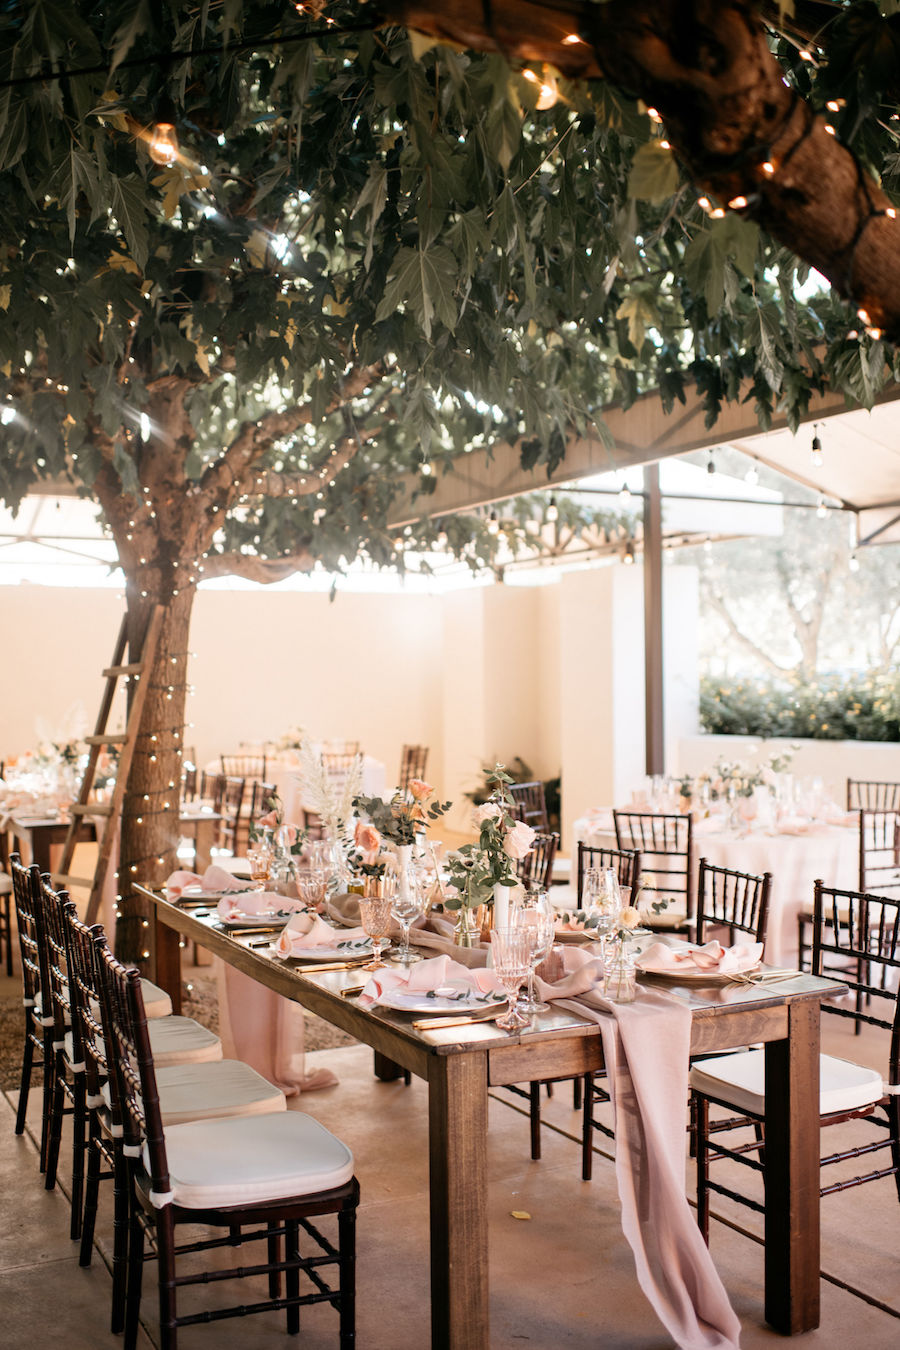 Romantic Pastel Tuscan Inspired Wedding Featured on Strictly Weddings84.jpg